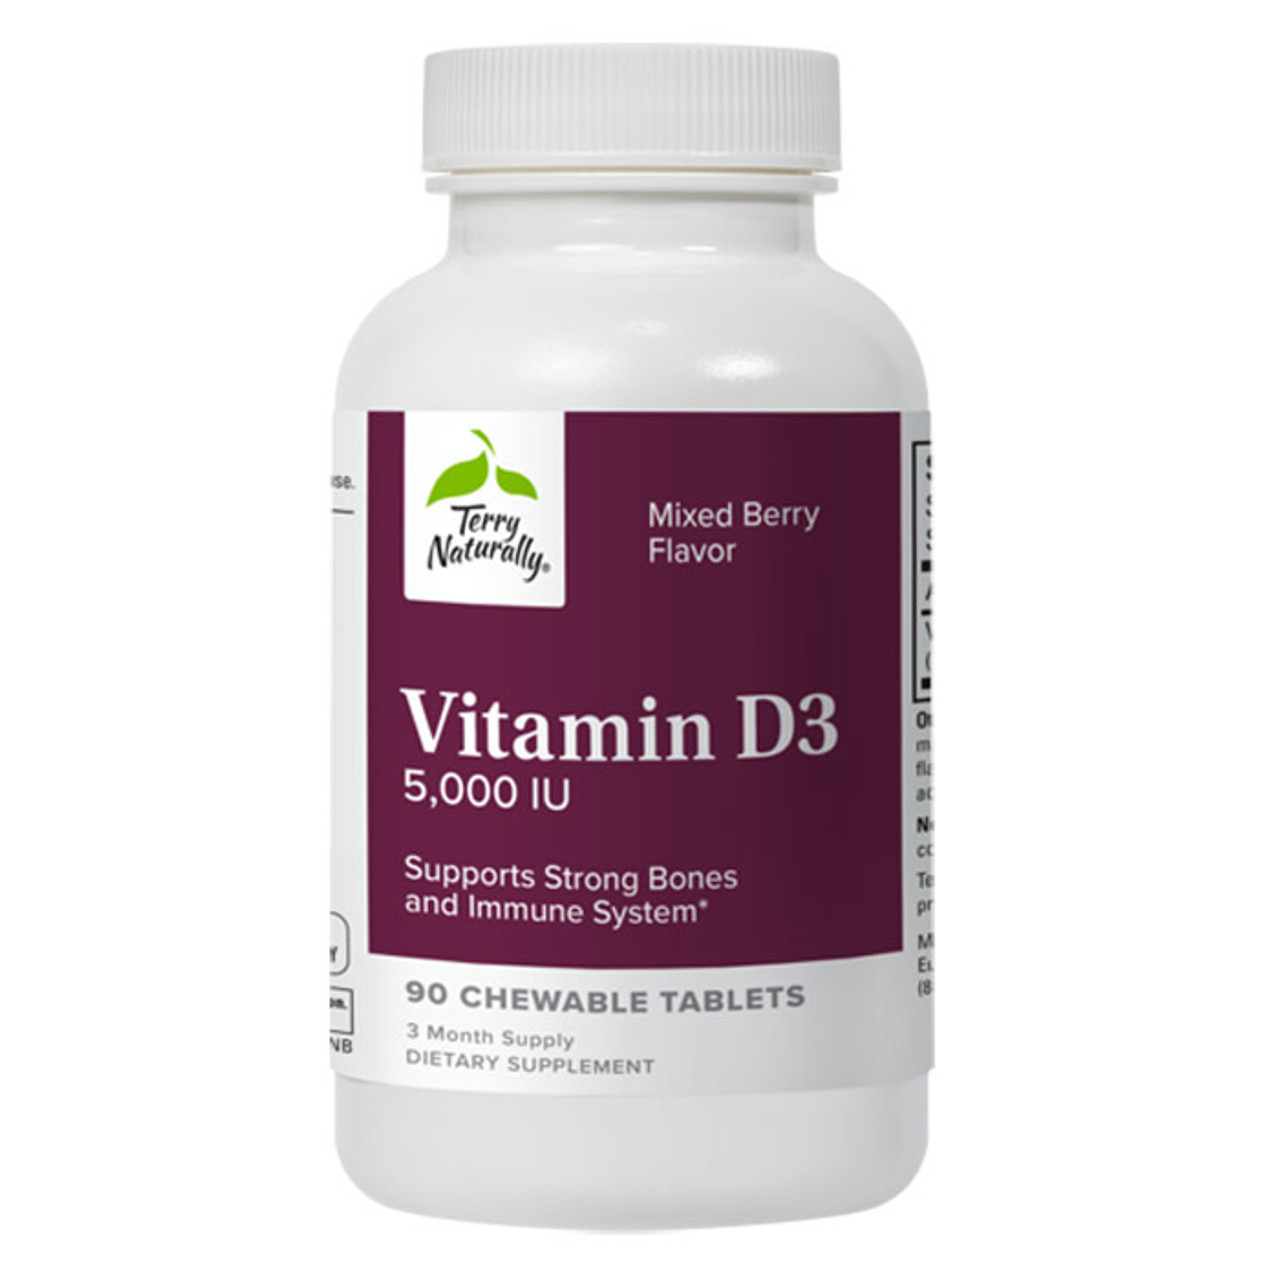 Terry Naturally Vitamin D3 Chewable Tablets